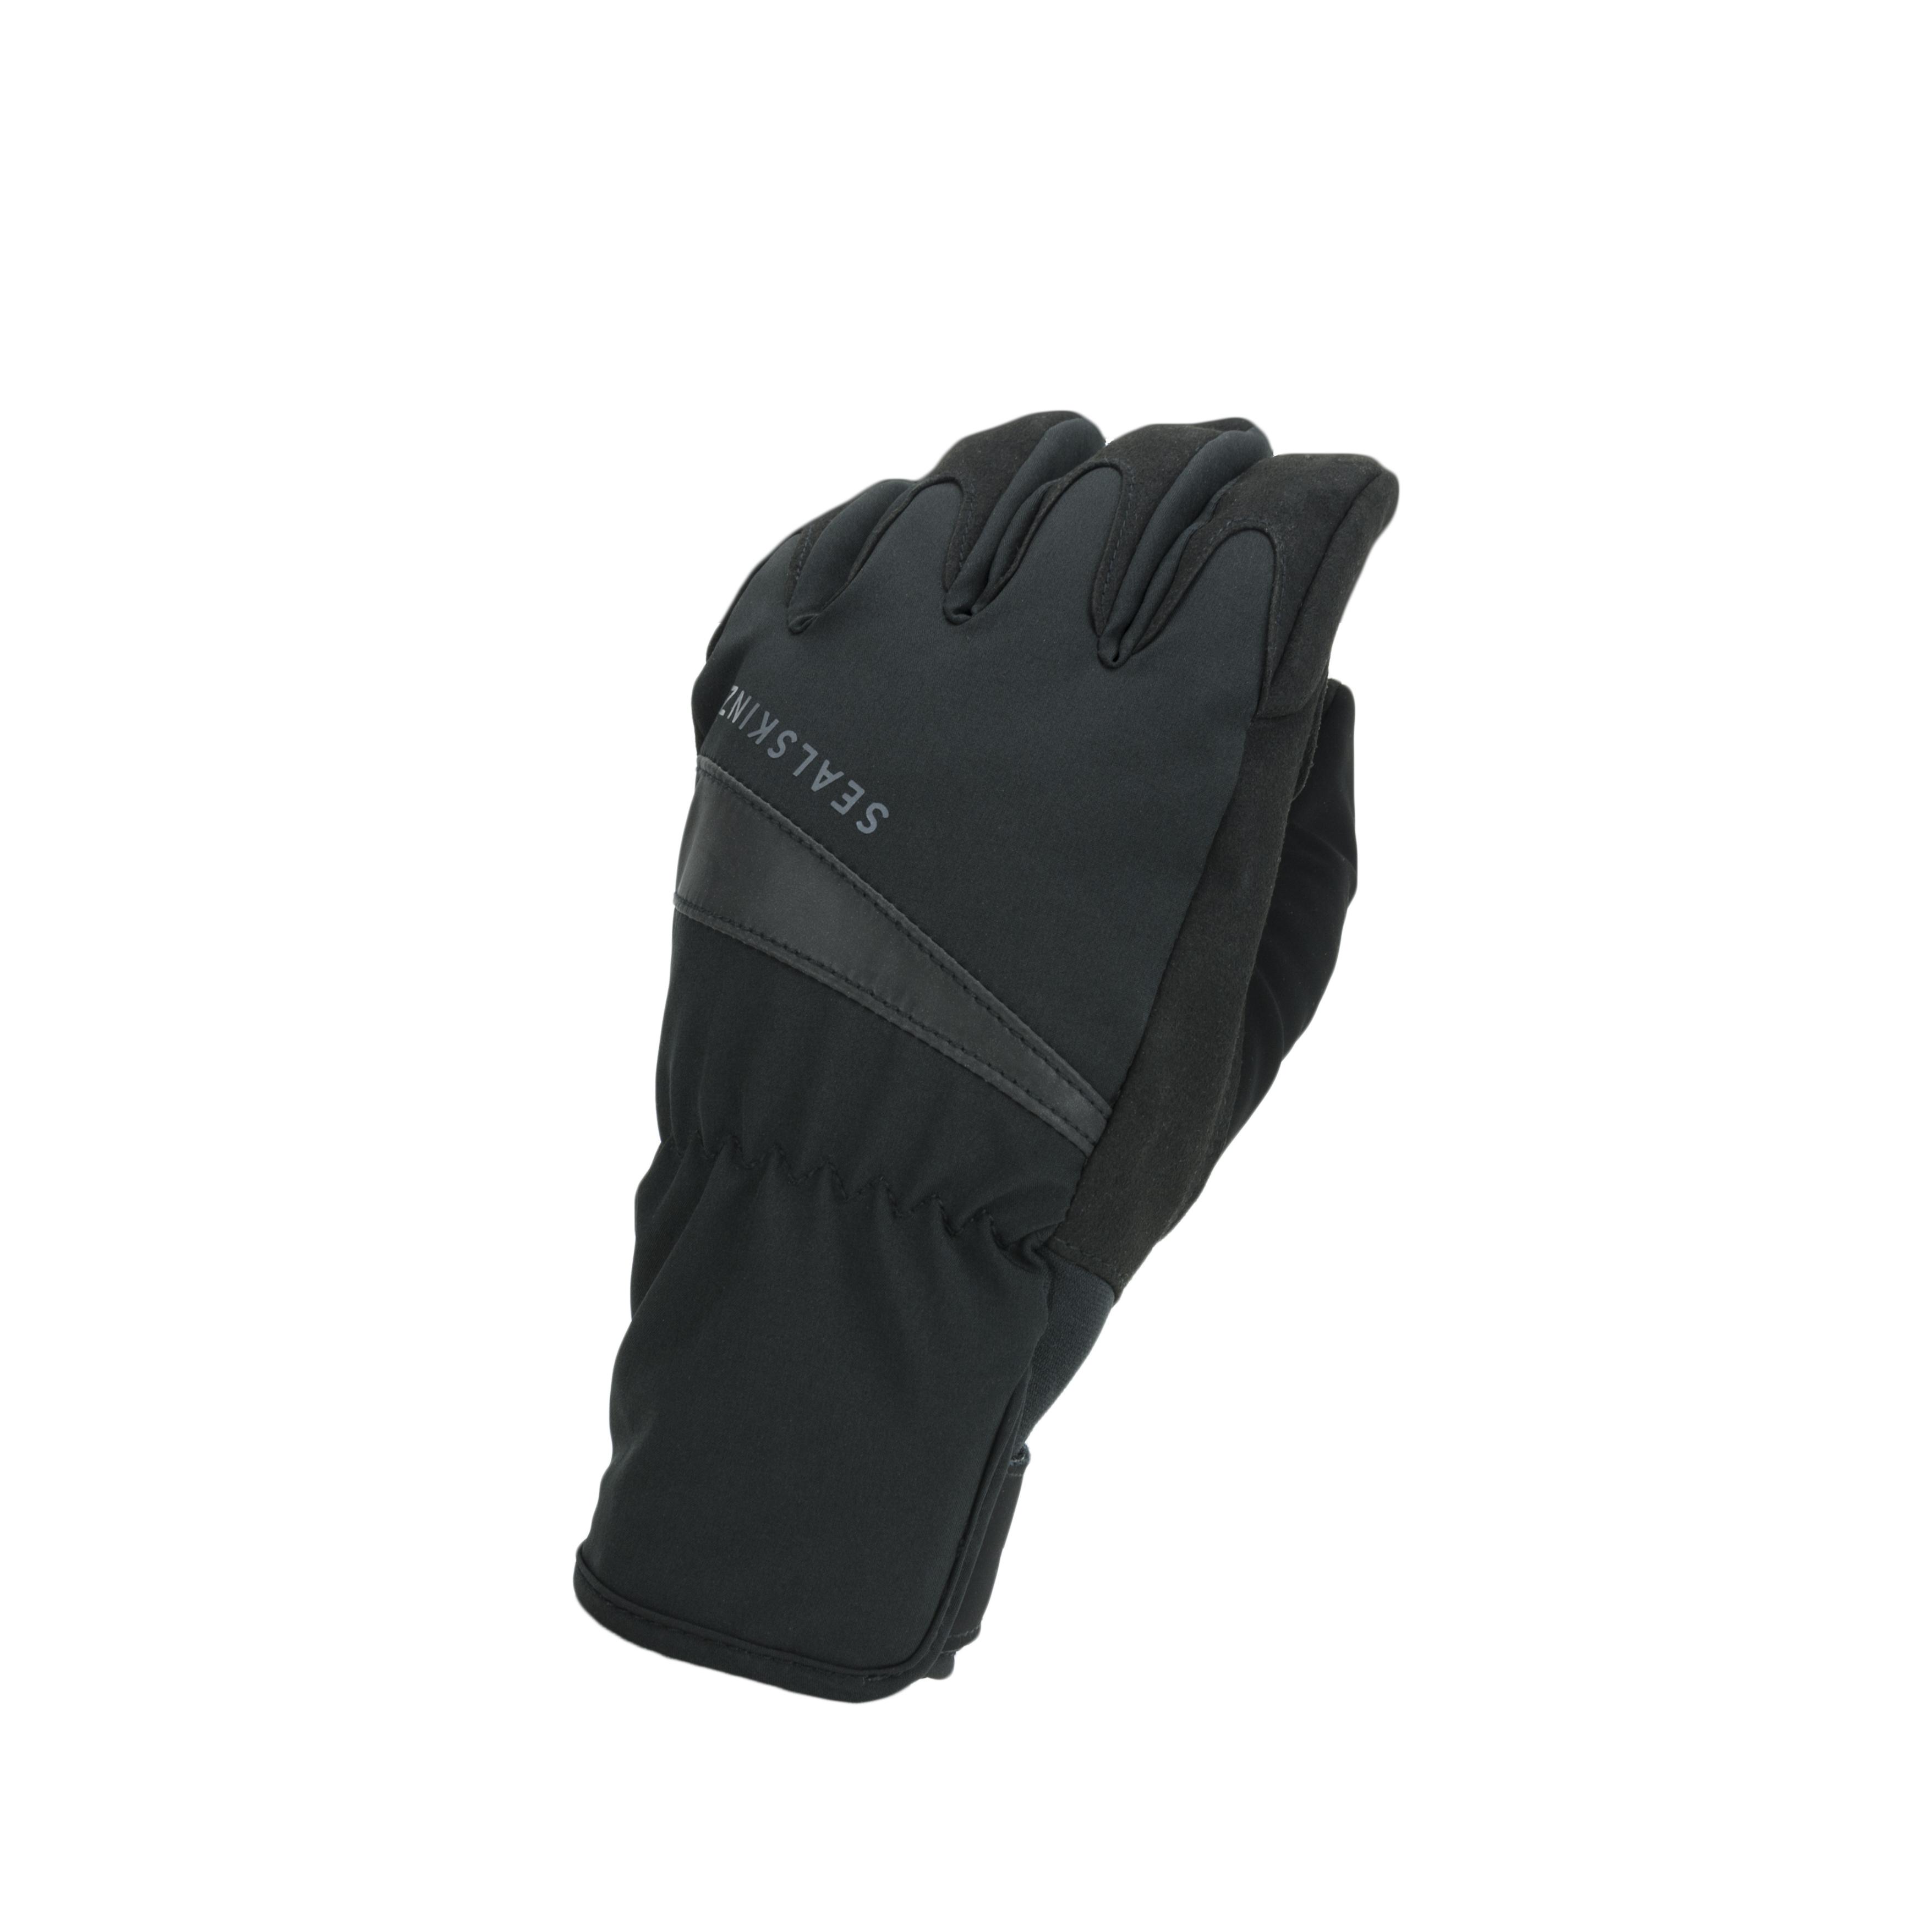 Sealskinz Womens All Weather Cycle Glove, Black - Xl